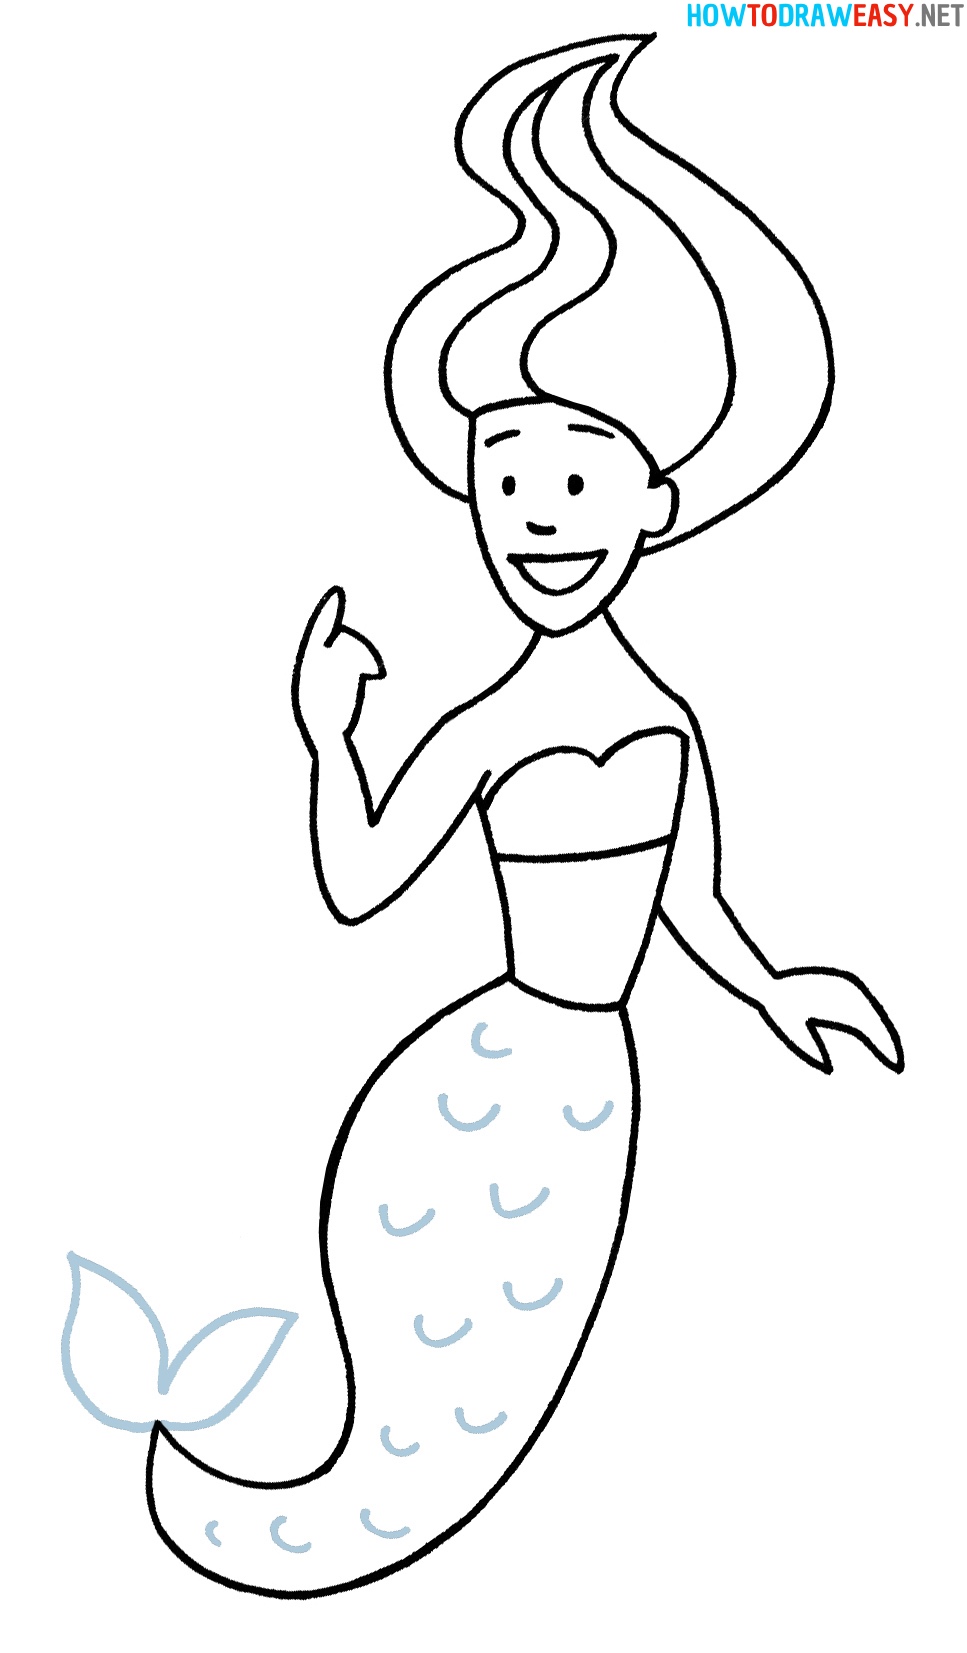 How to Draw a Mermaid 9